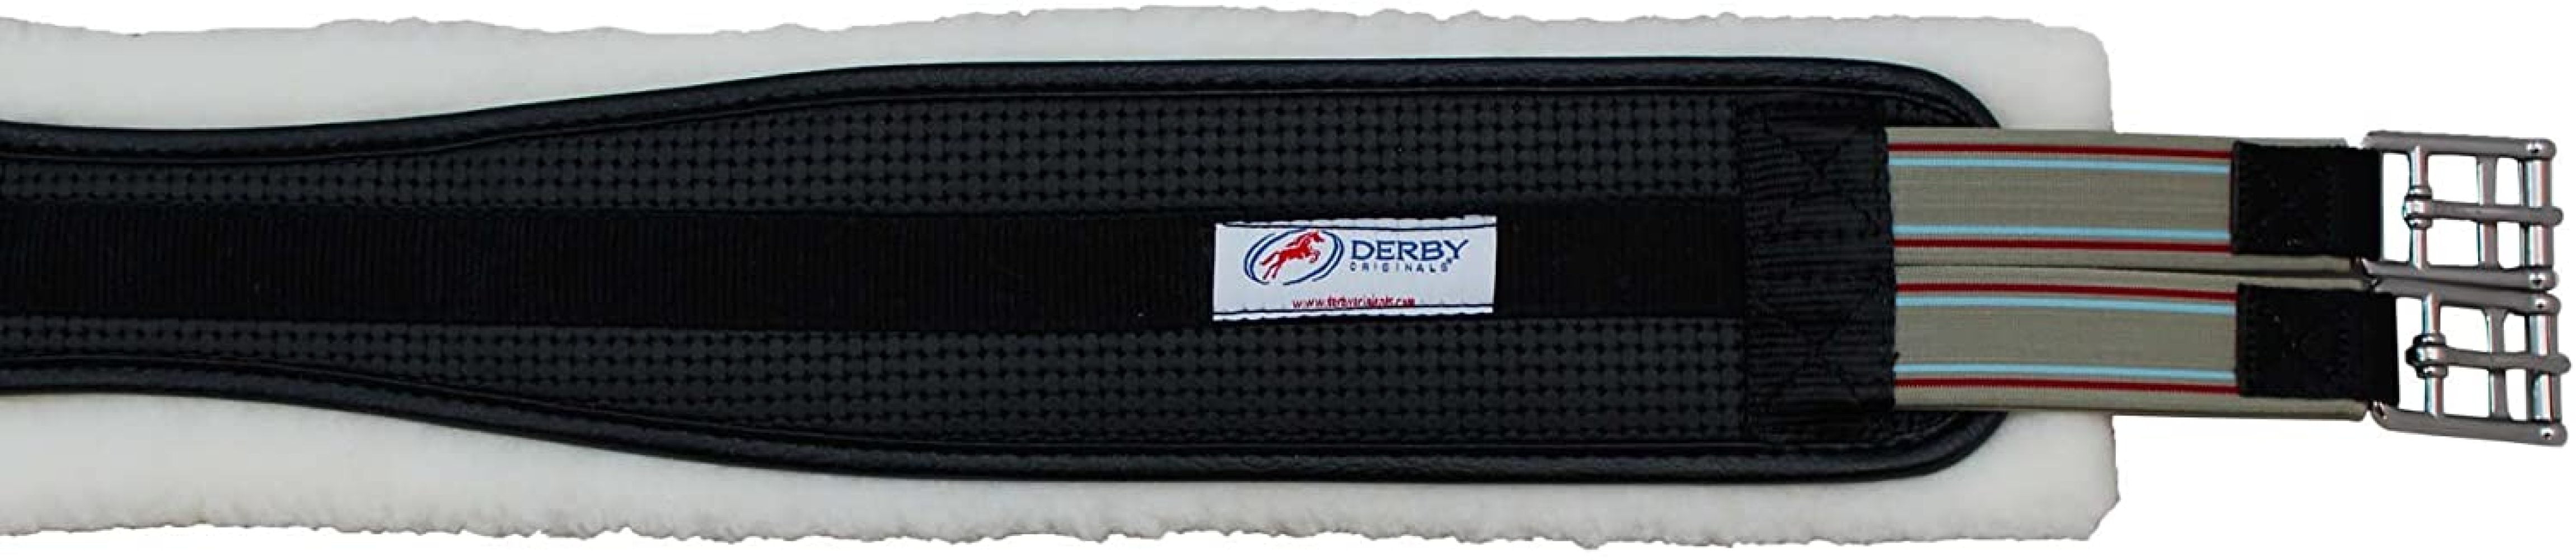 Derby Professional Air Tech Breathable Elastic English Girth with Removable Fleece Padding Black